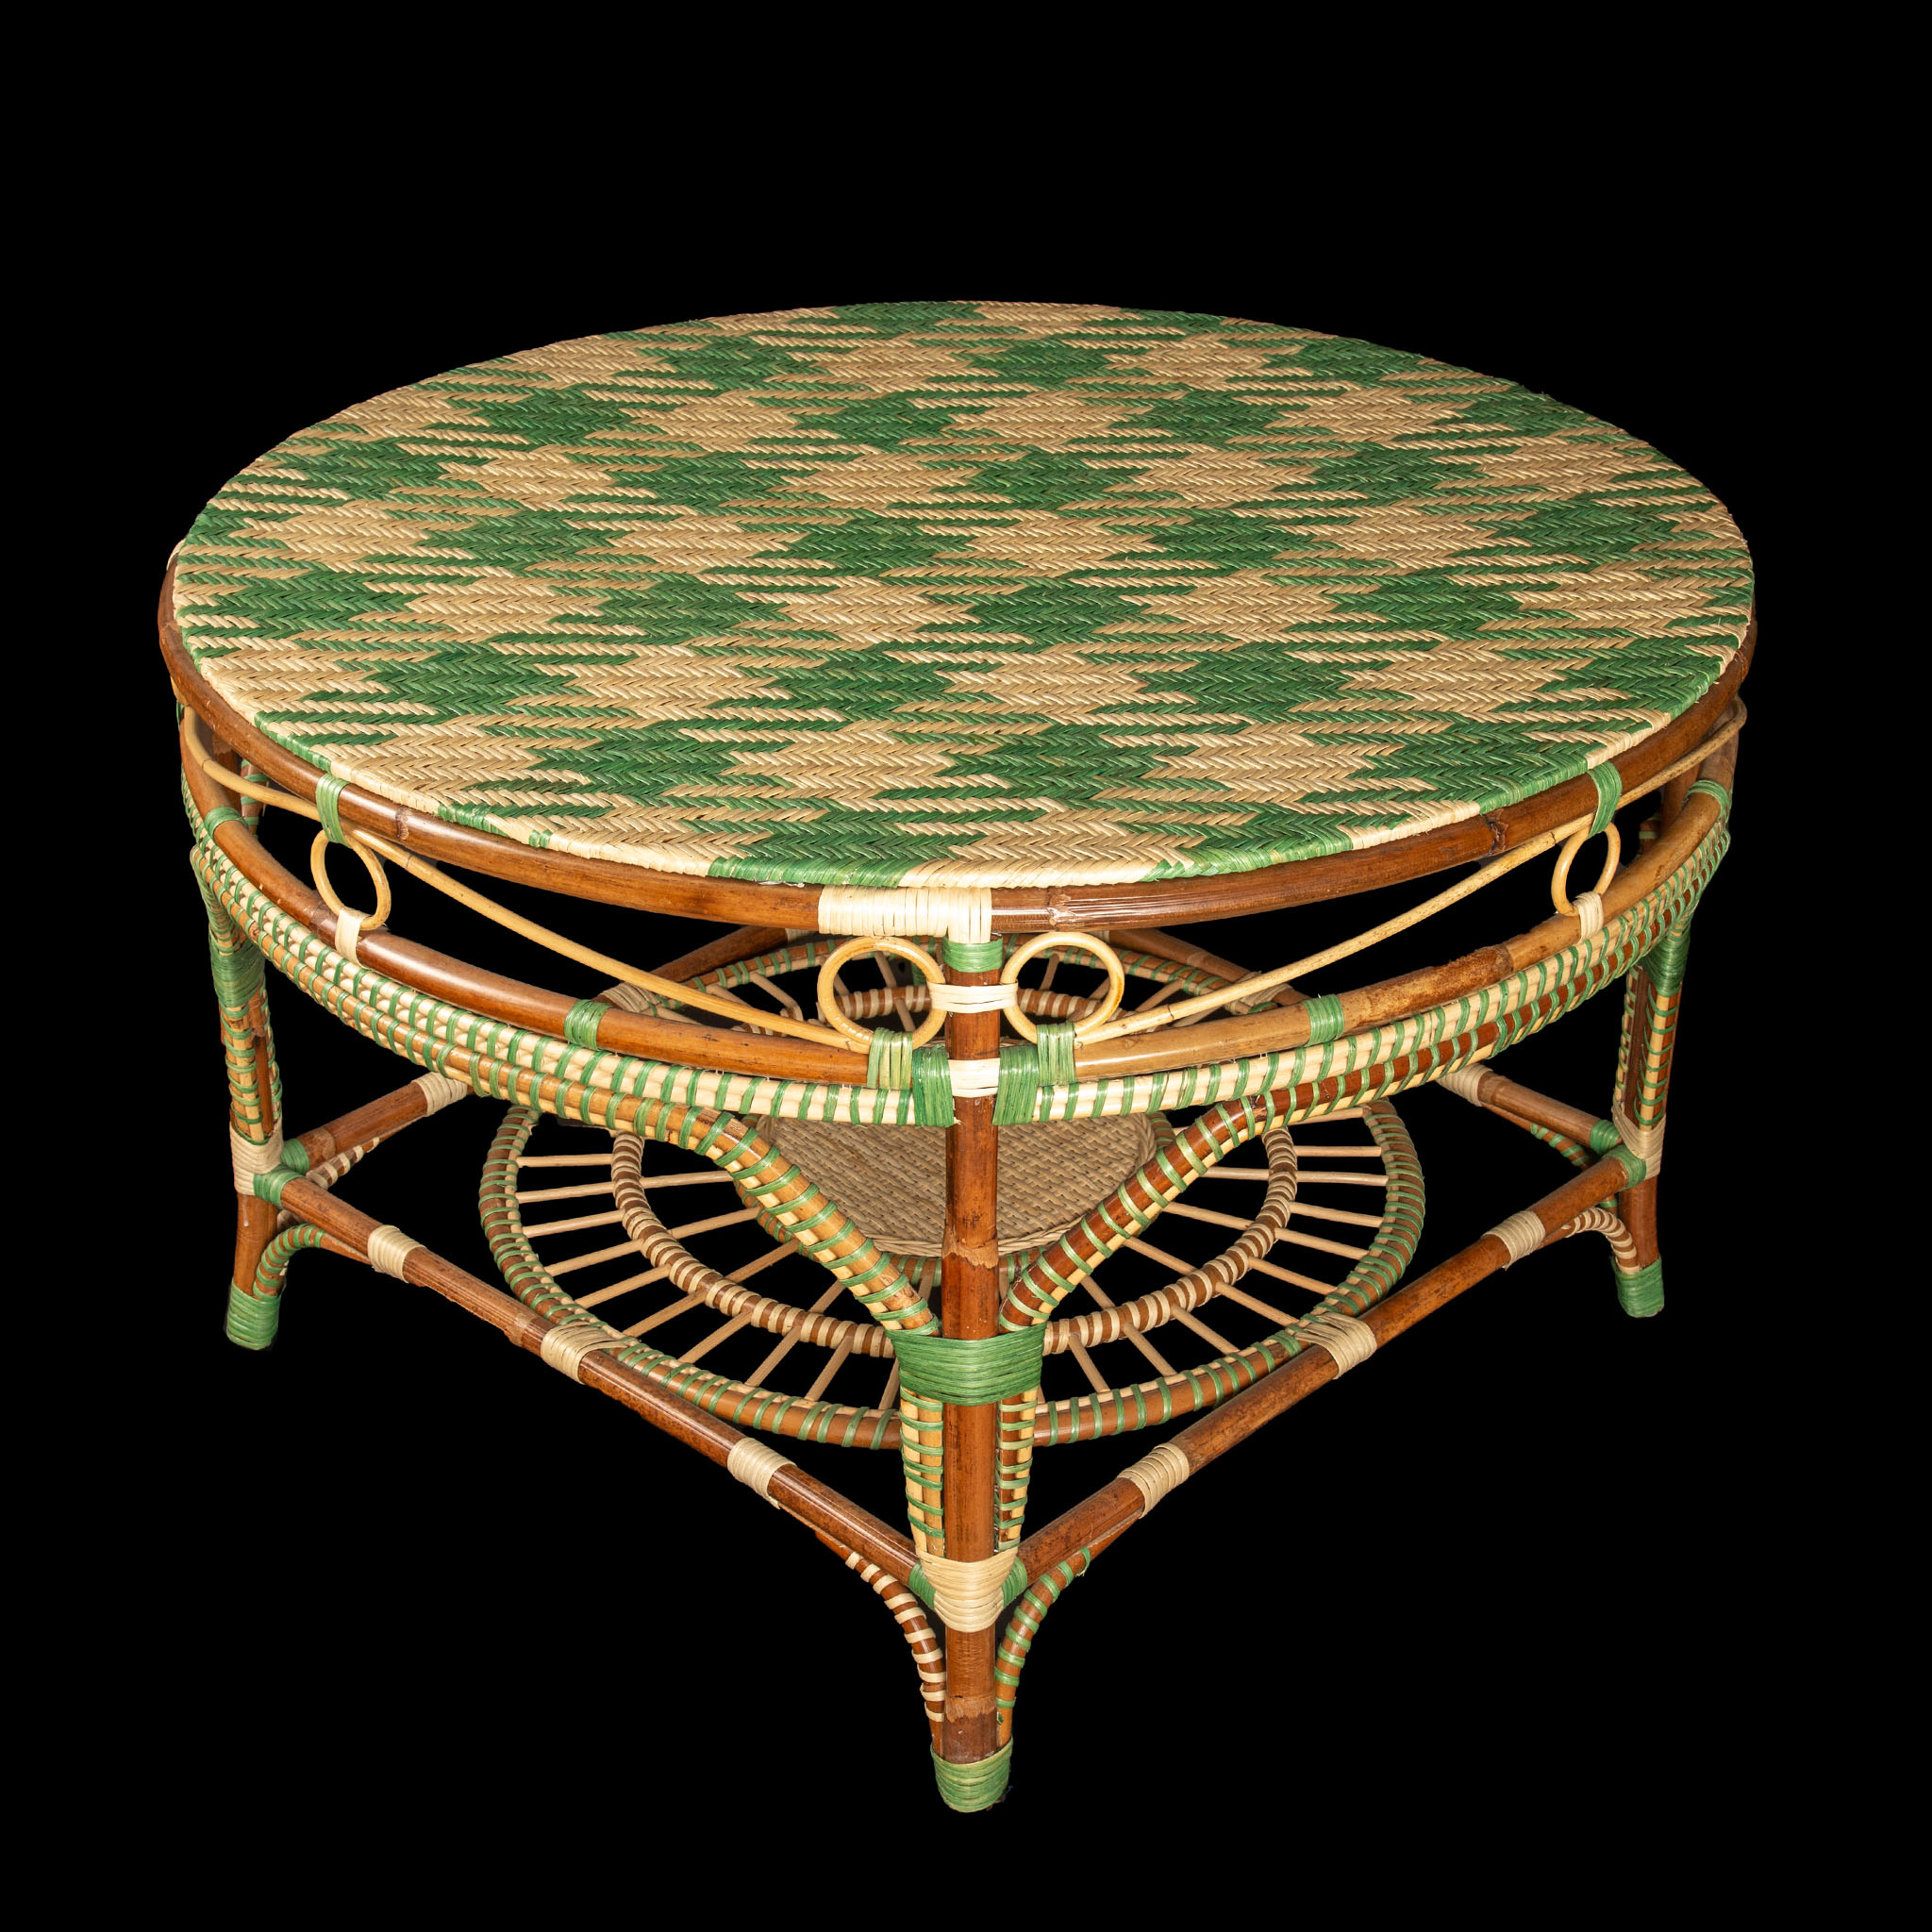 Rattan Houndstooth Center Table, Green and Cream by Creel and Gow